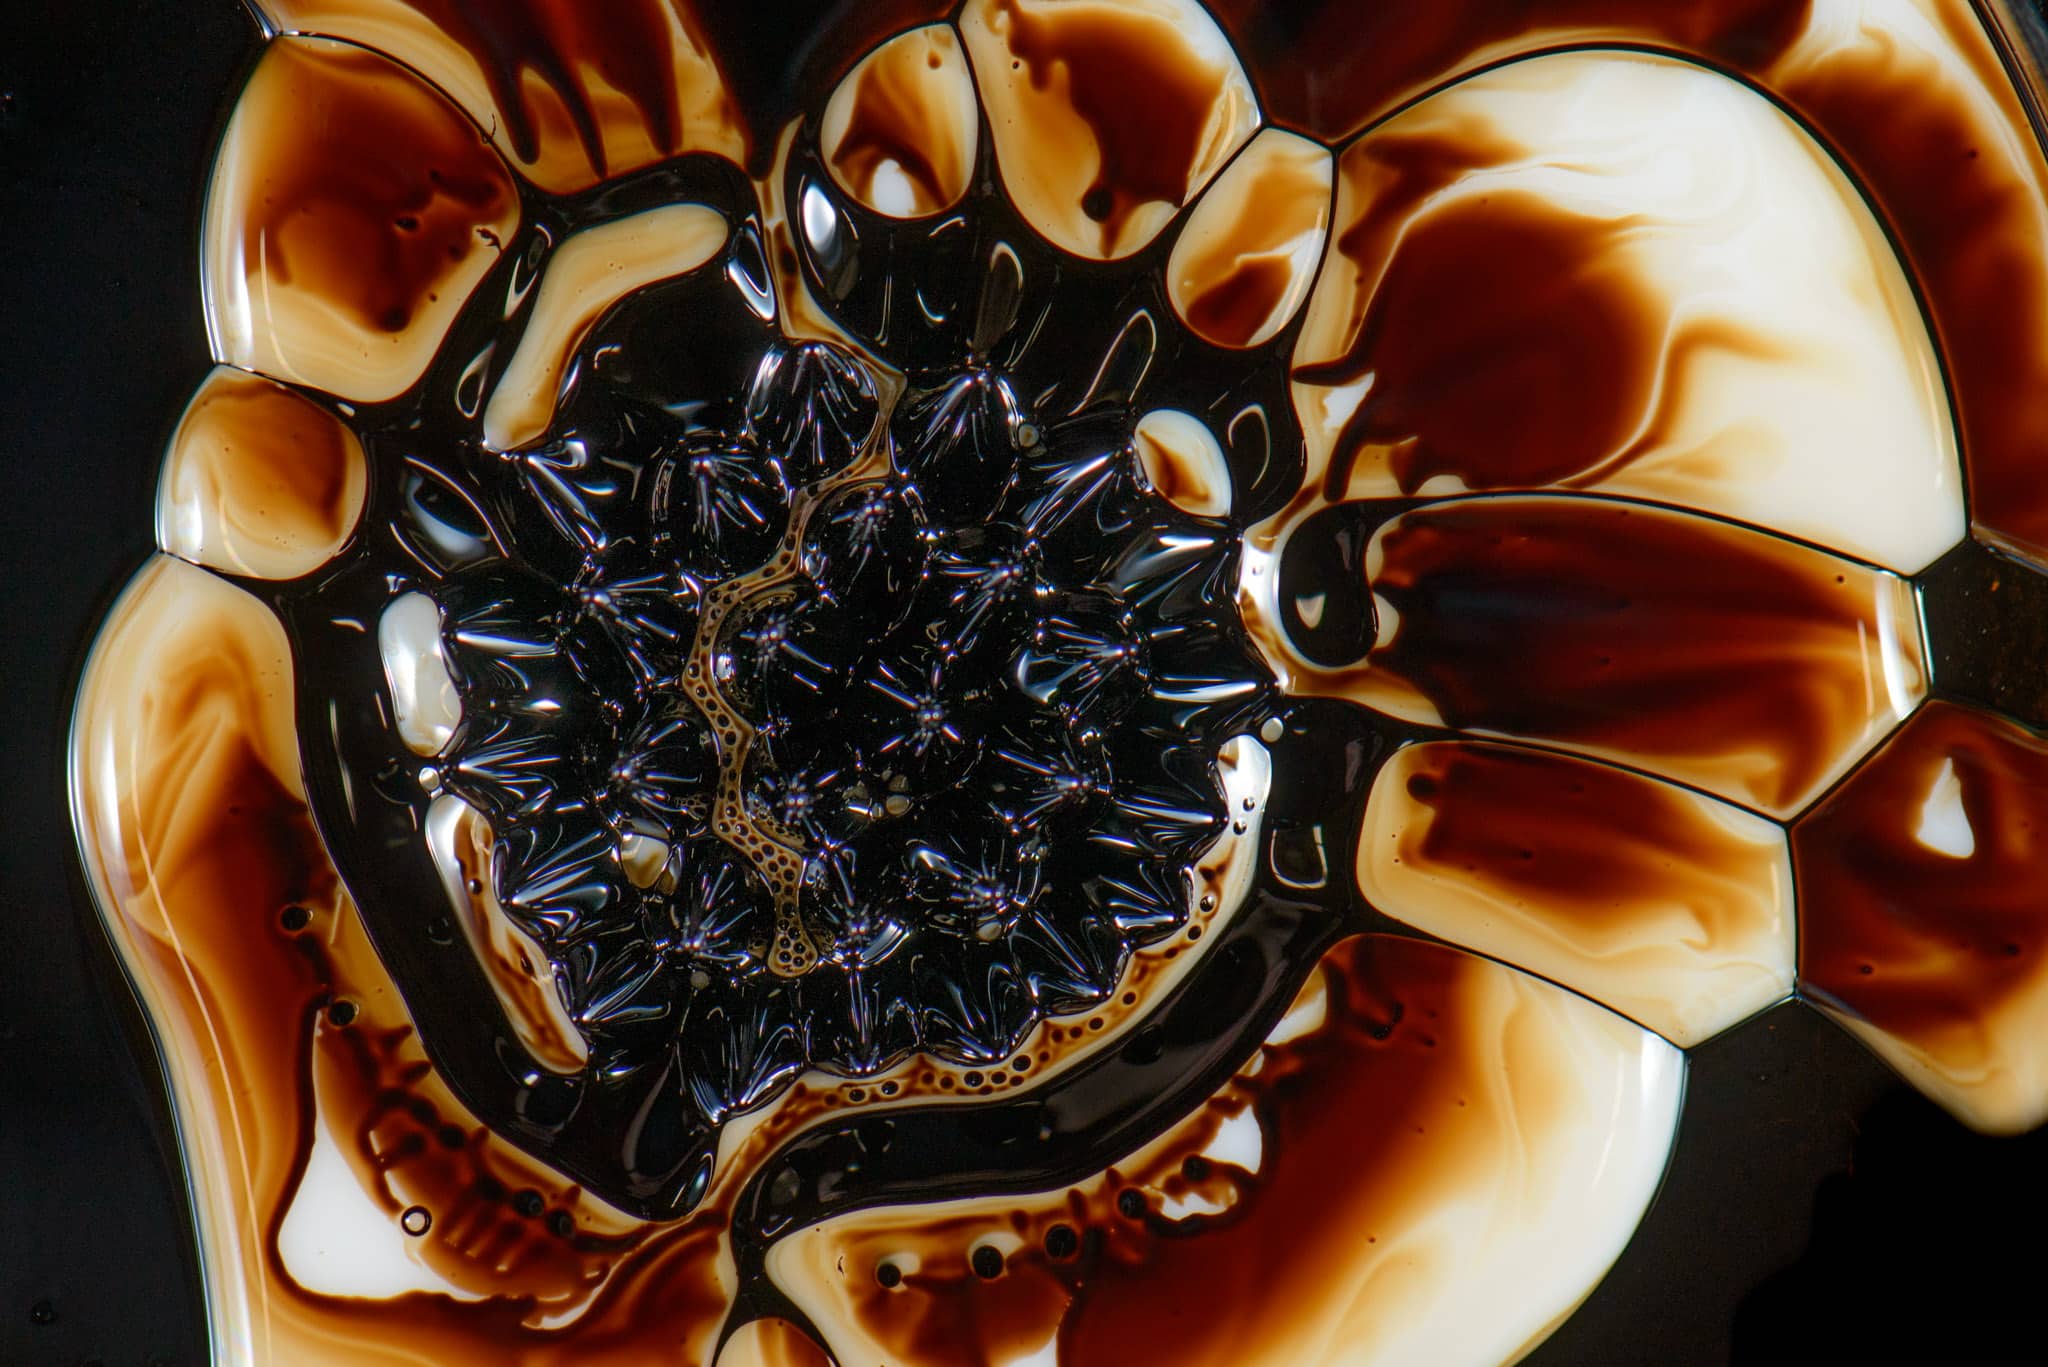 Ferro-magnetic fluid in a petrie dish with milk, food coloring, acrylic paint, and glycerine. - Ferrofluid abstract photographs